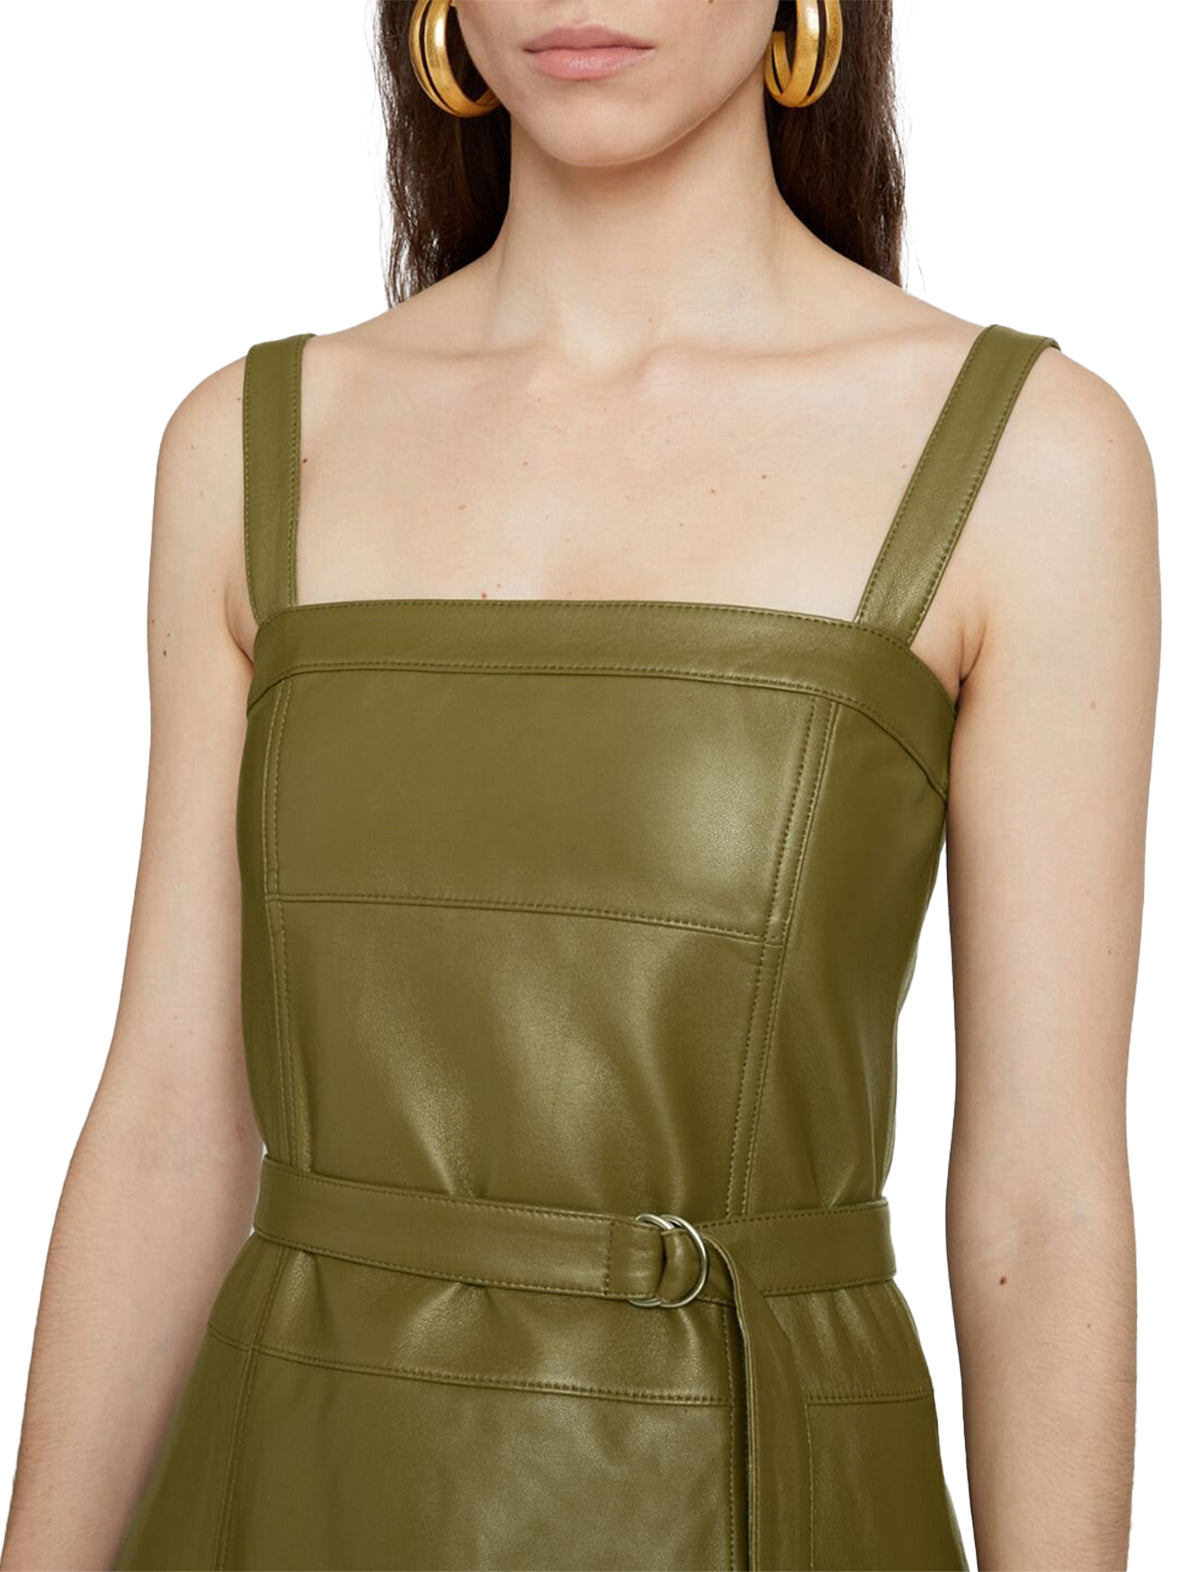 PROENZA SCHOULER WHITE LABEL Leather Belted Dress in Military